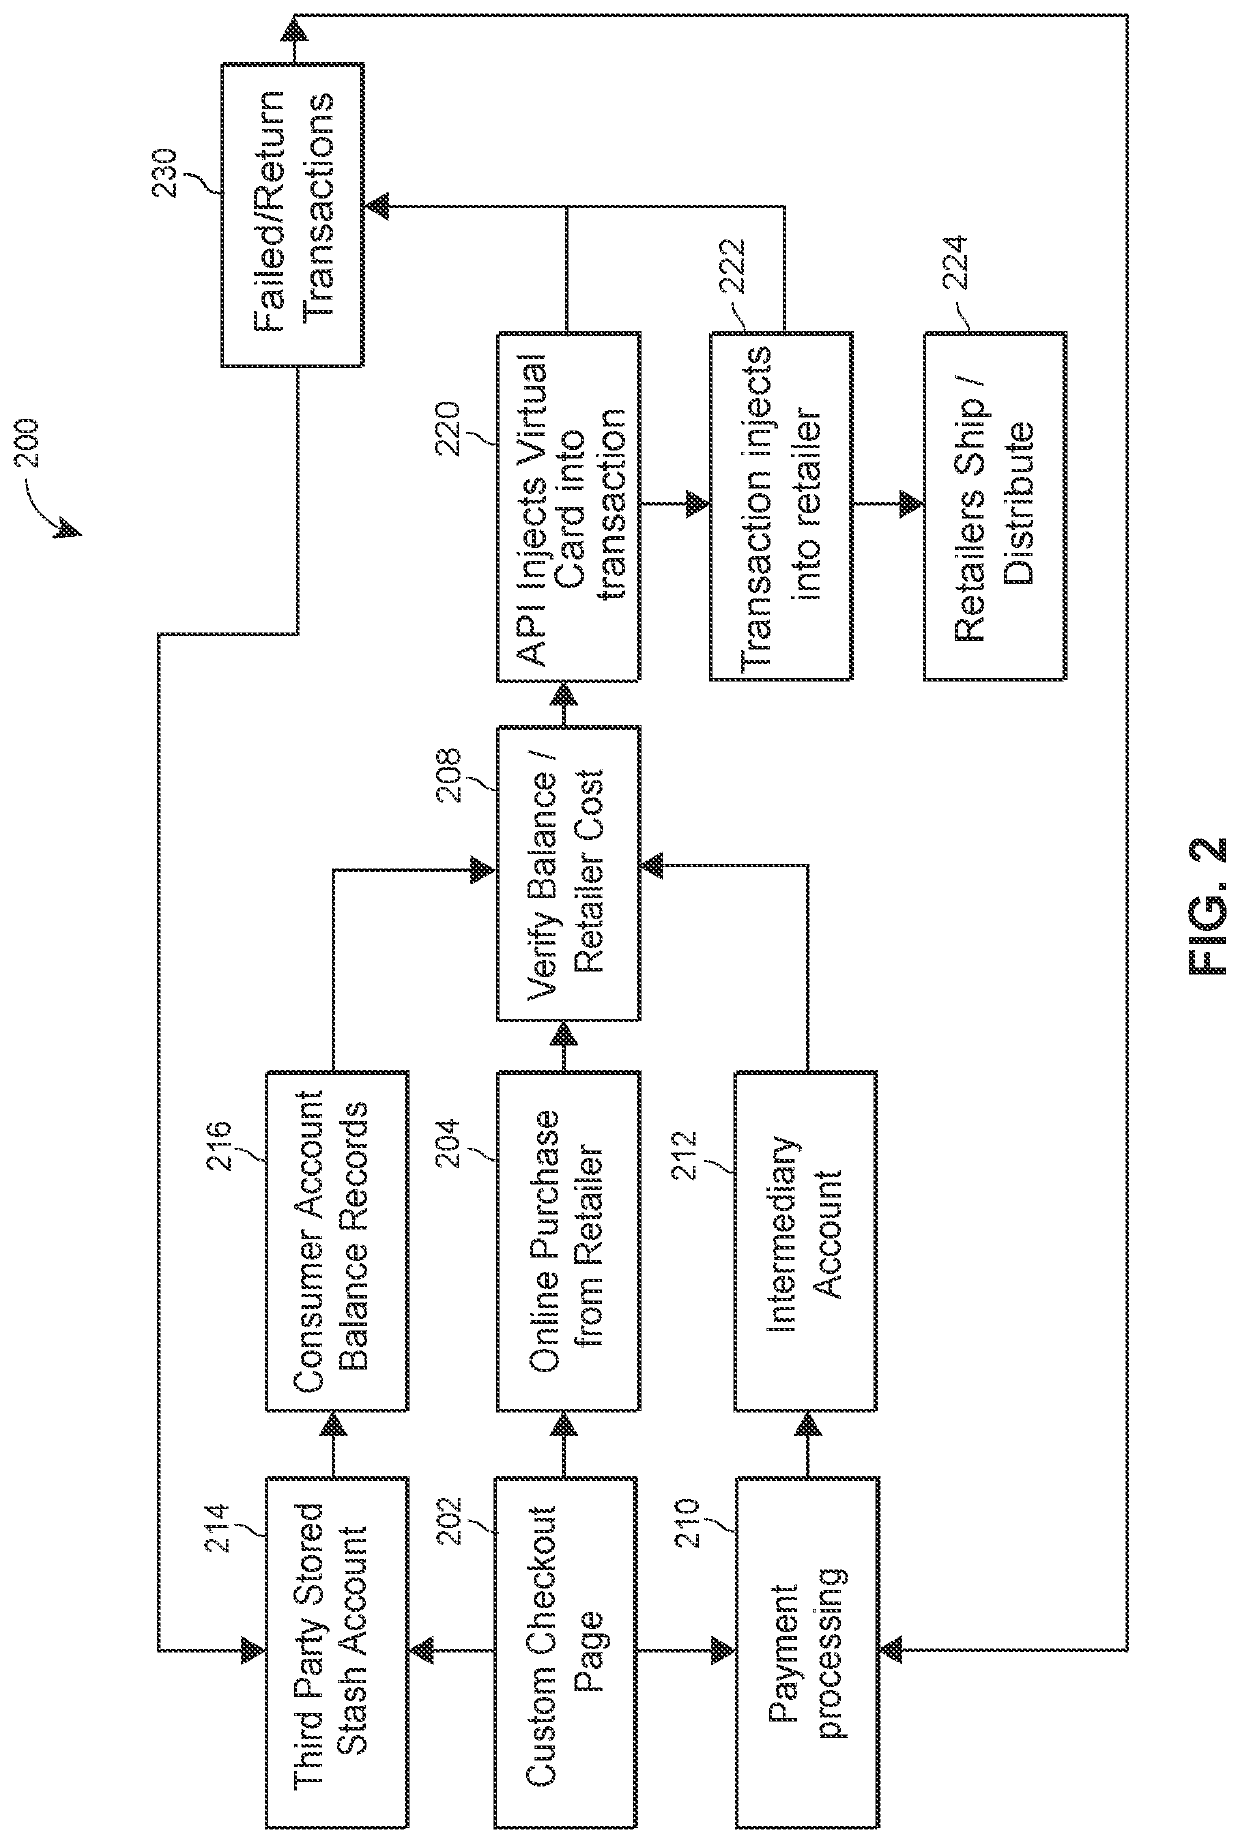 Secure product provisioning systems and methods for preventing electronic fraud by generation of ephemeral virtual cards for injection from secure proxy accounts into electronic provisioning networks